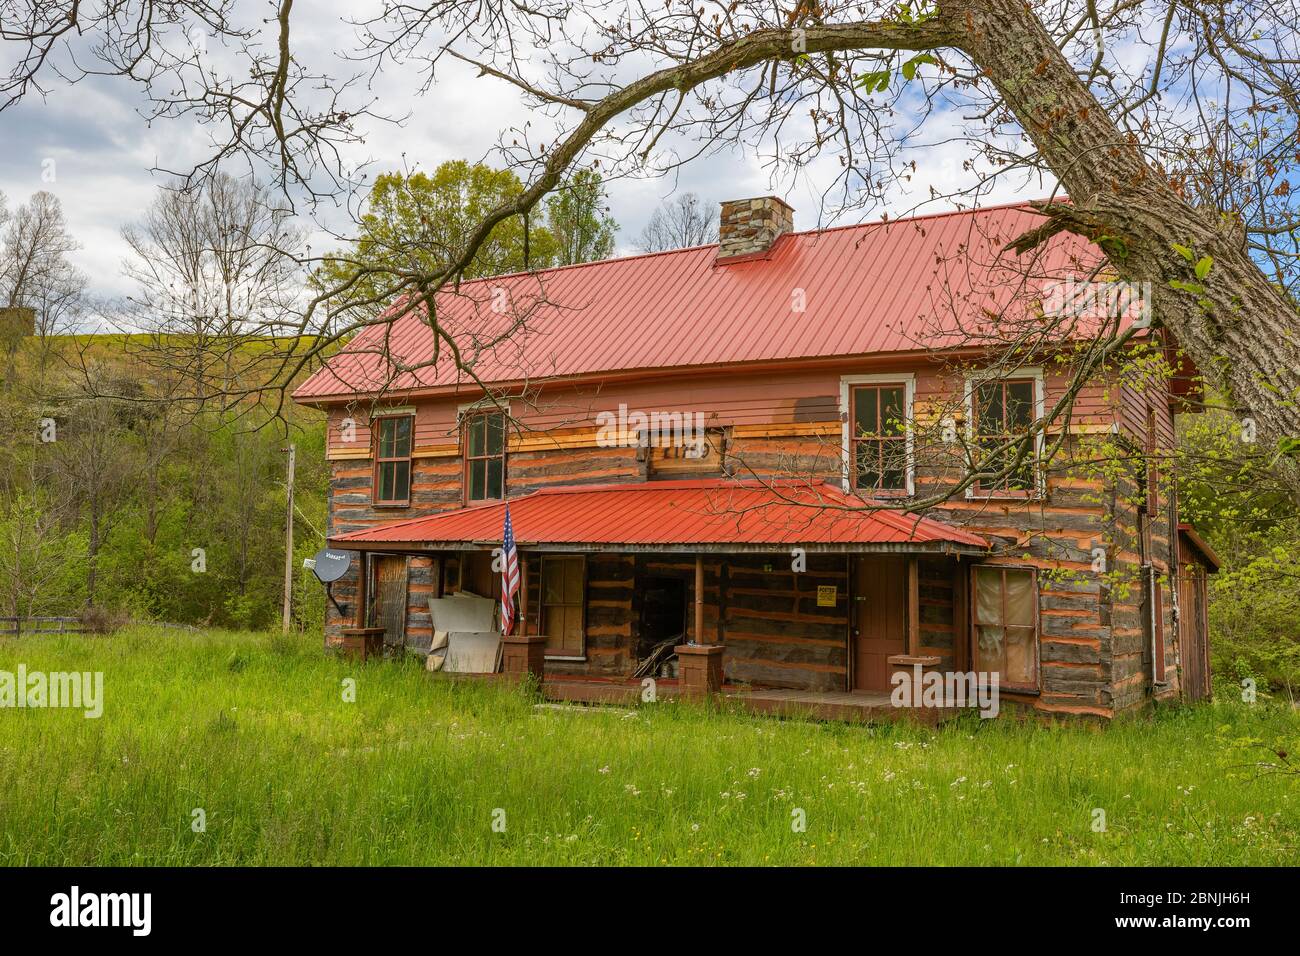 Tazewell, Tennessee, USA - April 28, 2020:  Seen from a country road, this old log home appears to be undergoing renovations. Stock Photo